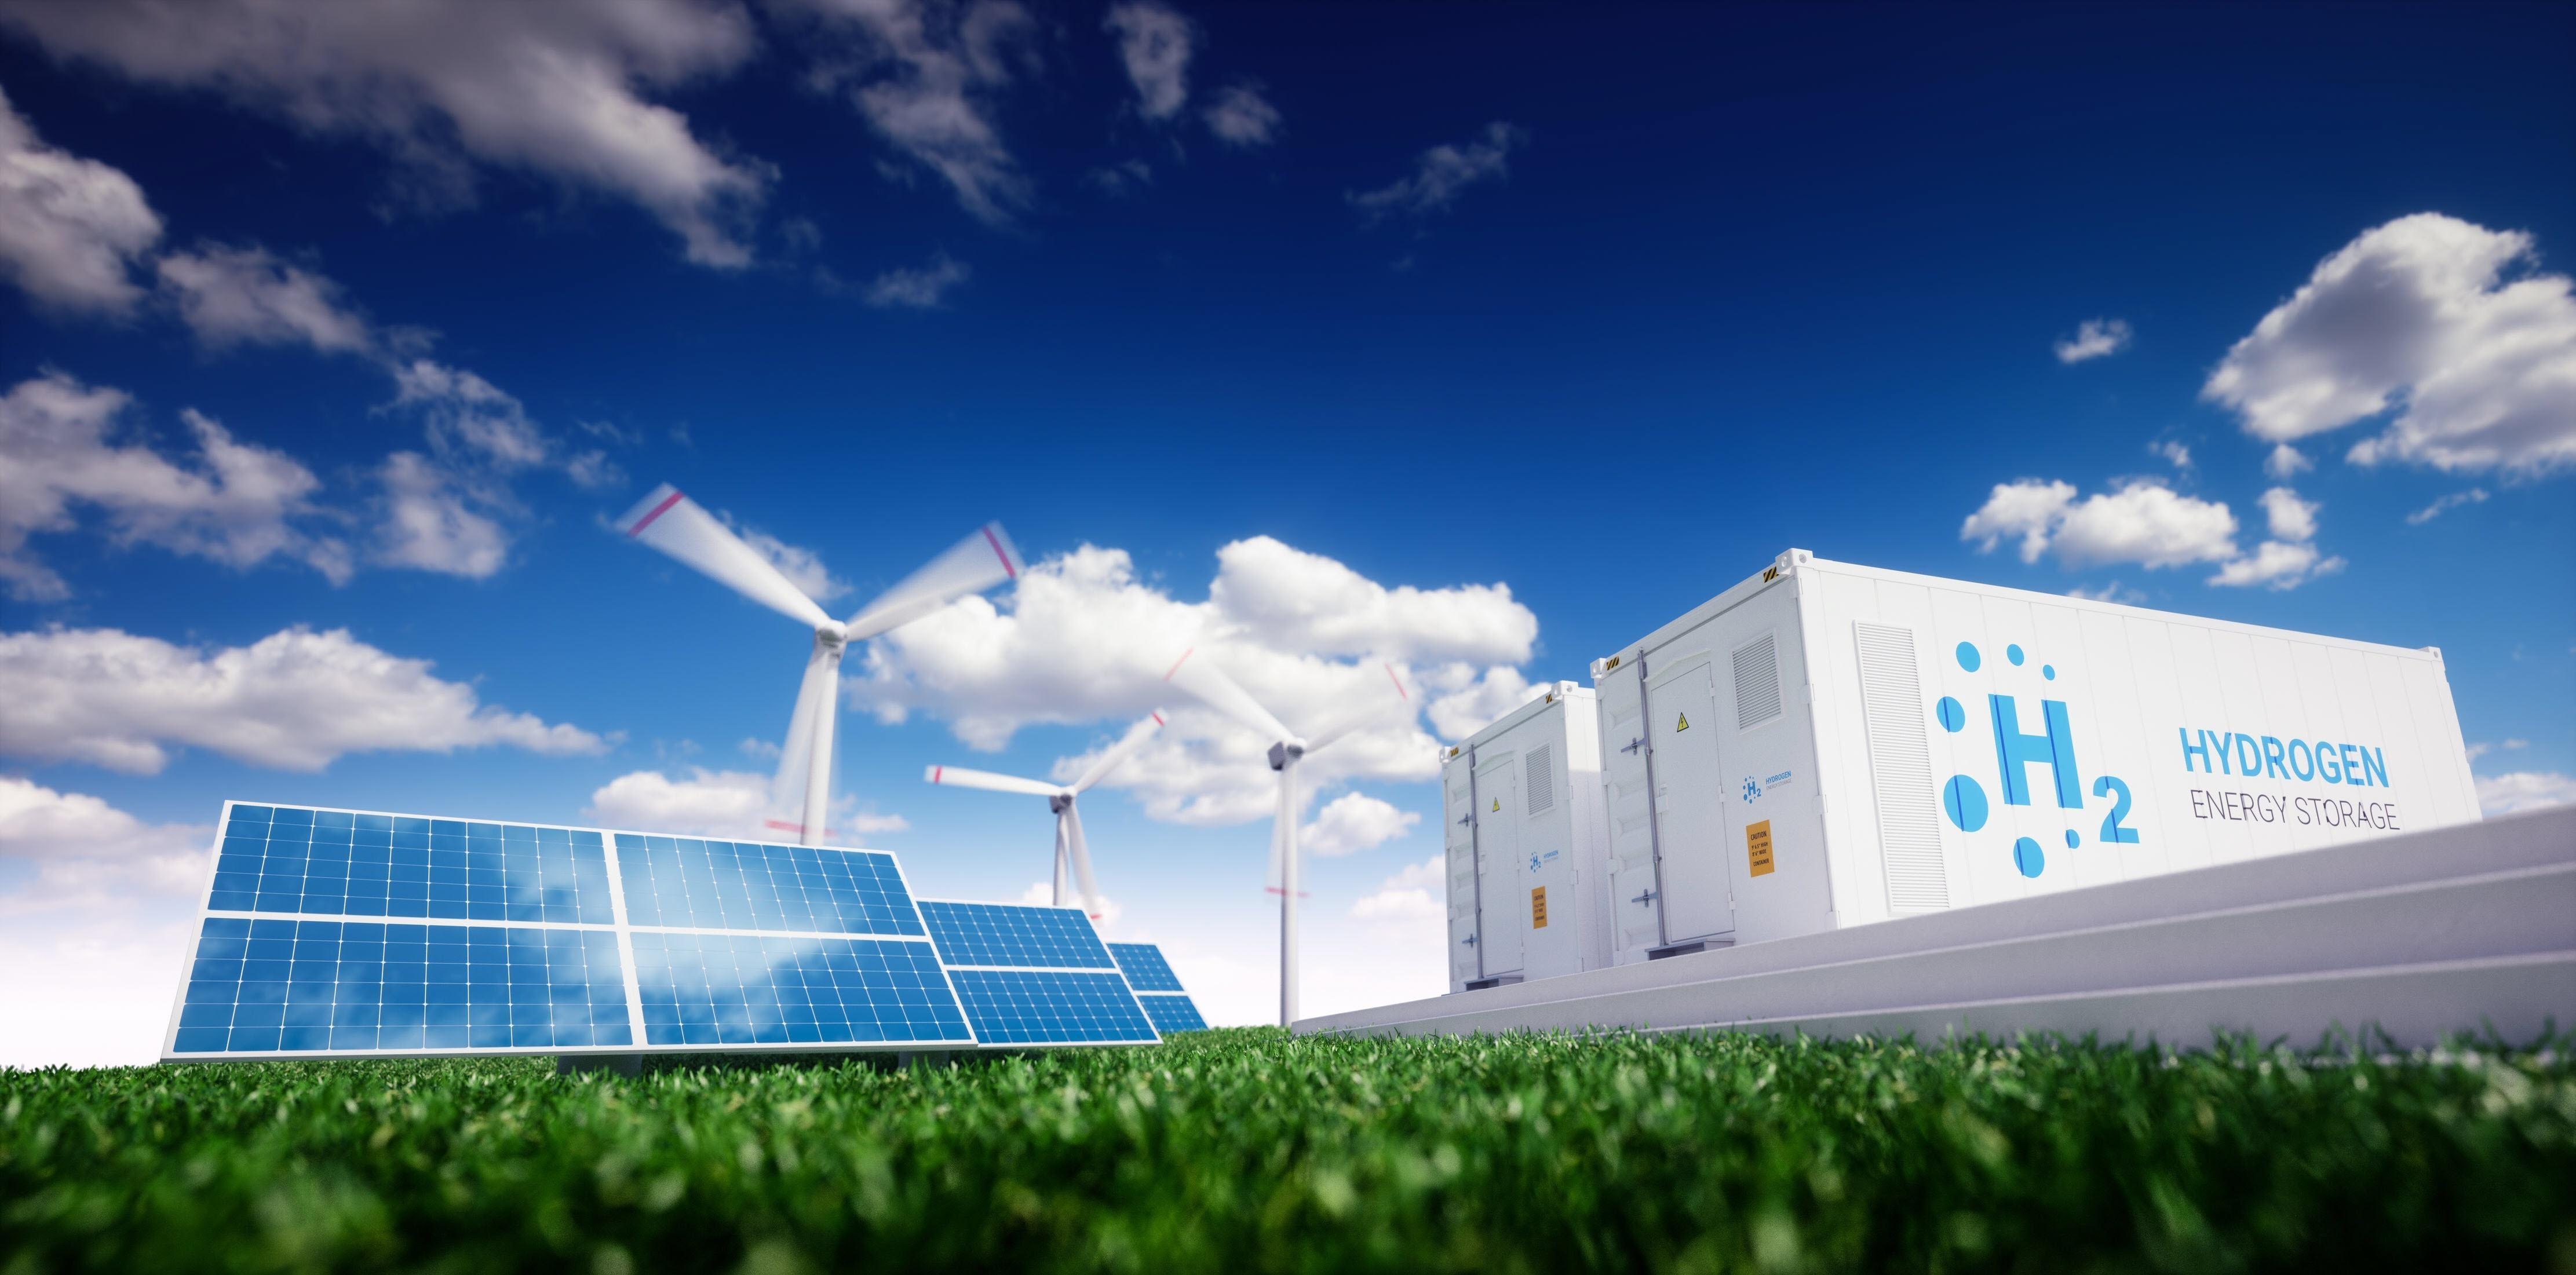 photovoltaic panel and energy storage